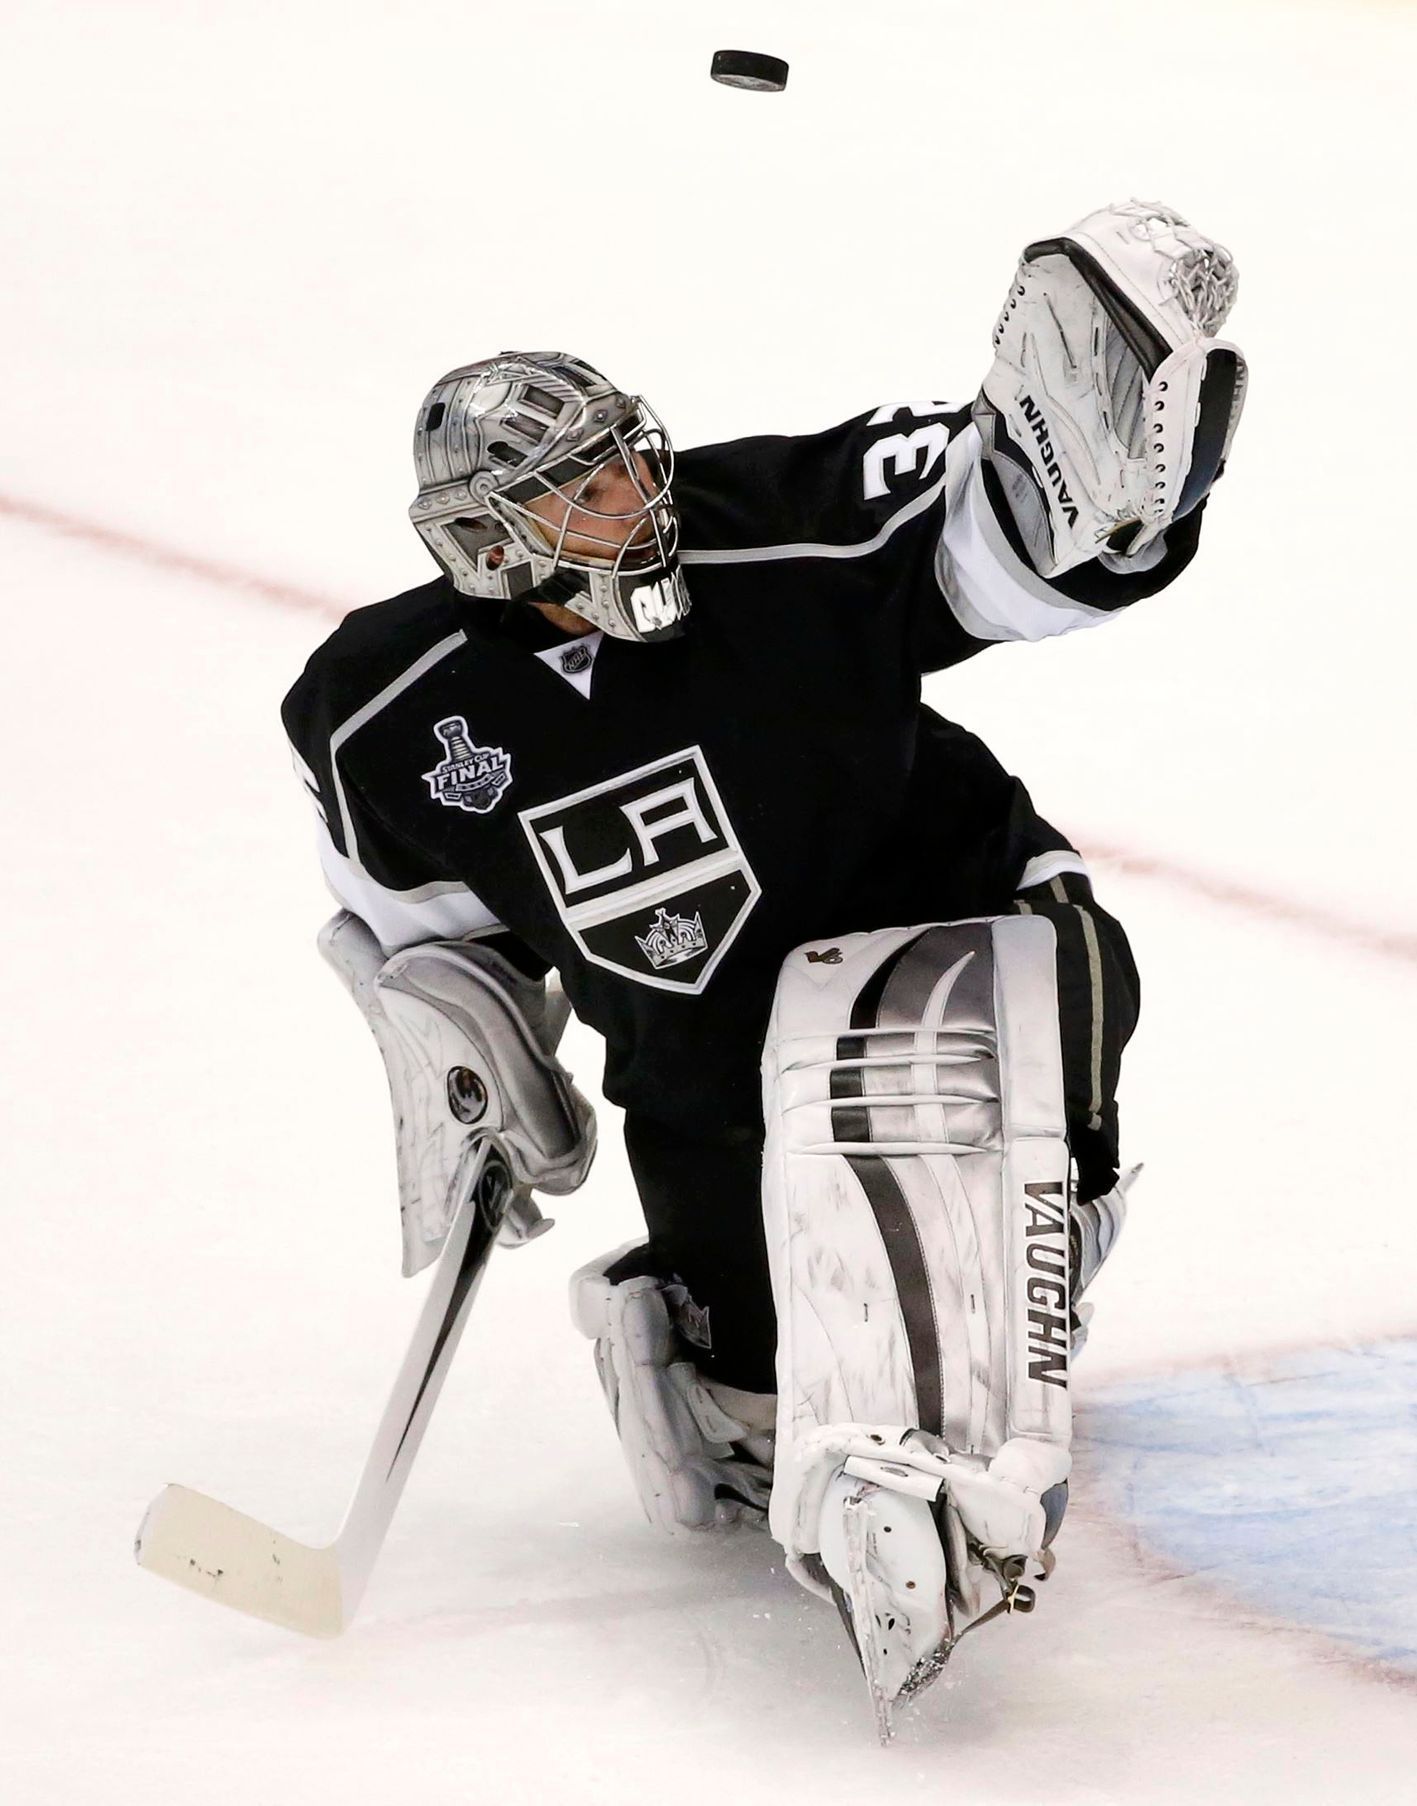 Kings goalie Quick makes a save against the Rangers during the third period in Game 1 of their NHL Stanley Cup Finals hockey series in Los Angeles